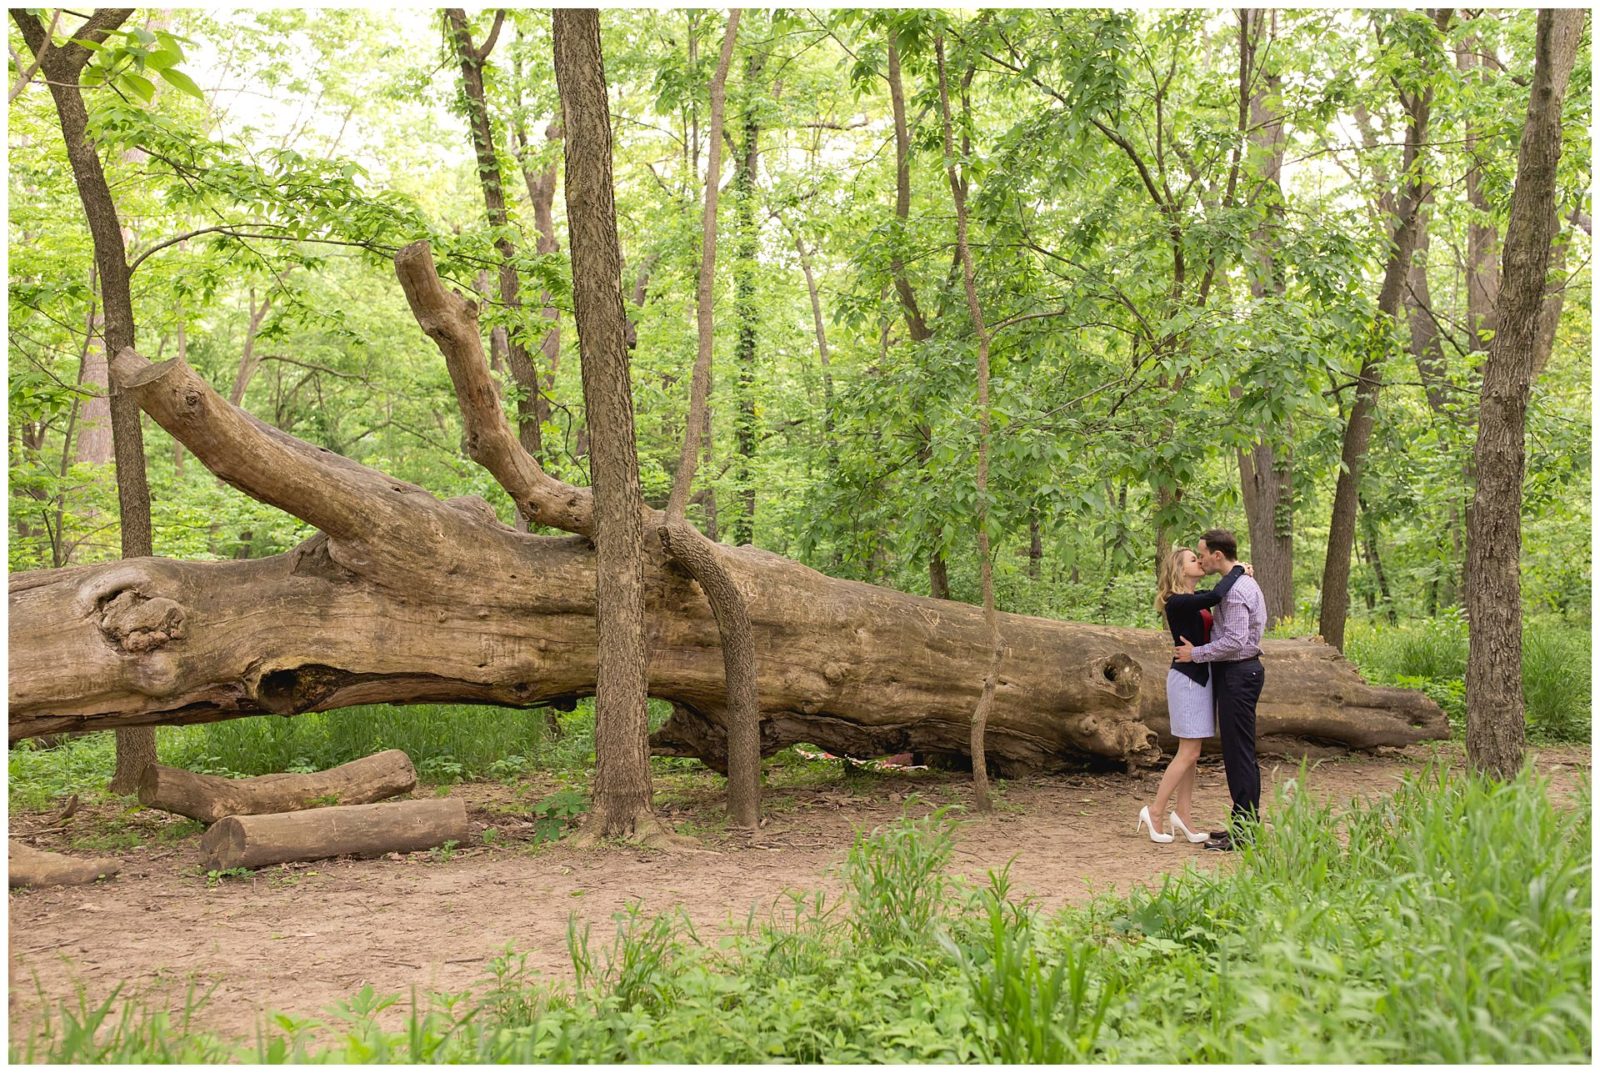 Engagement photos in the forest at the University of Kentucky Arboretum in Lexington, KY